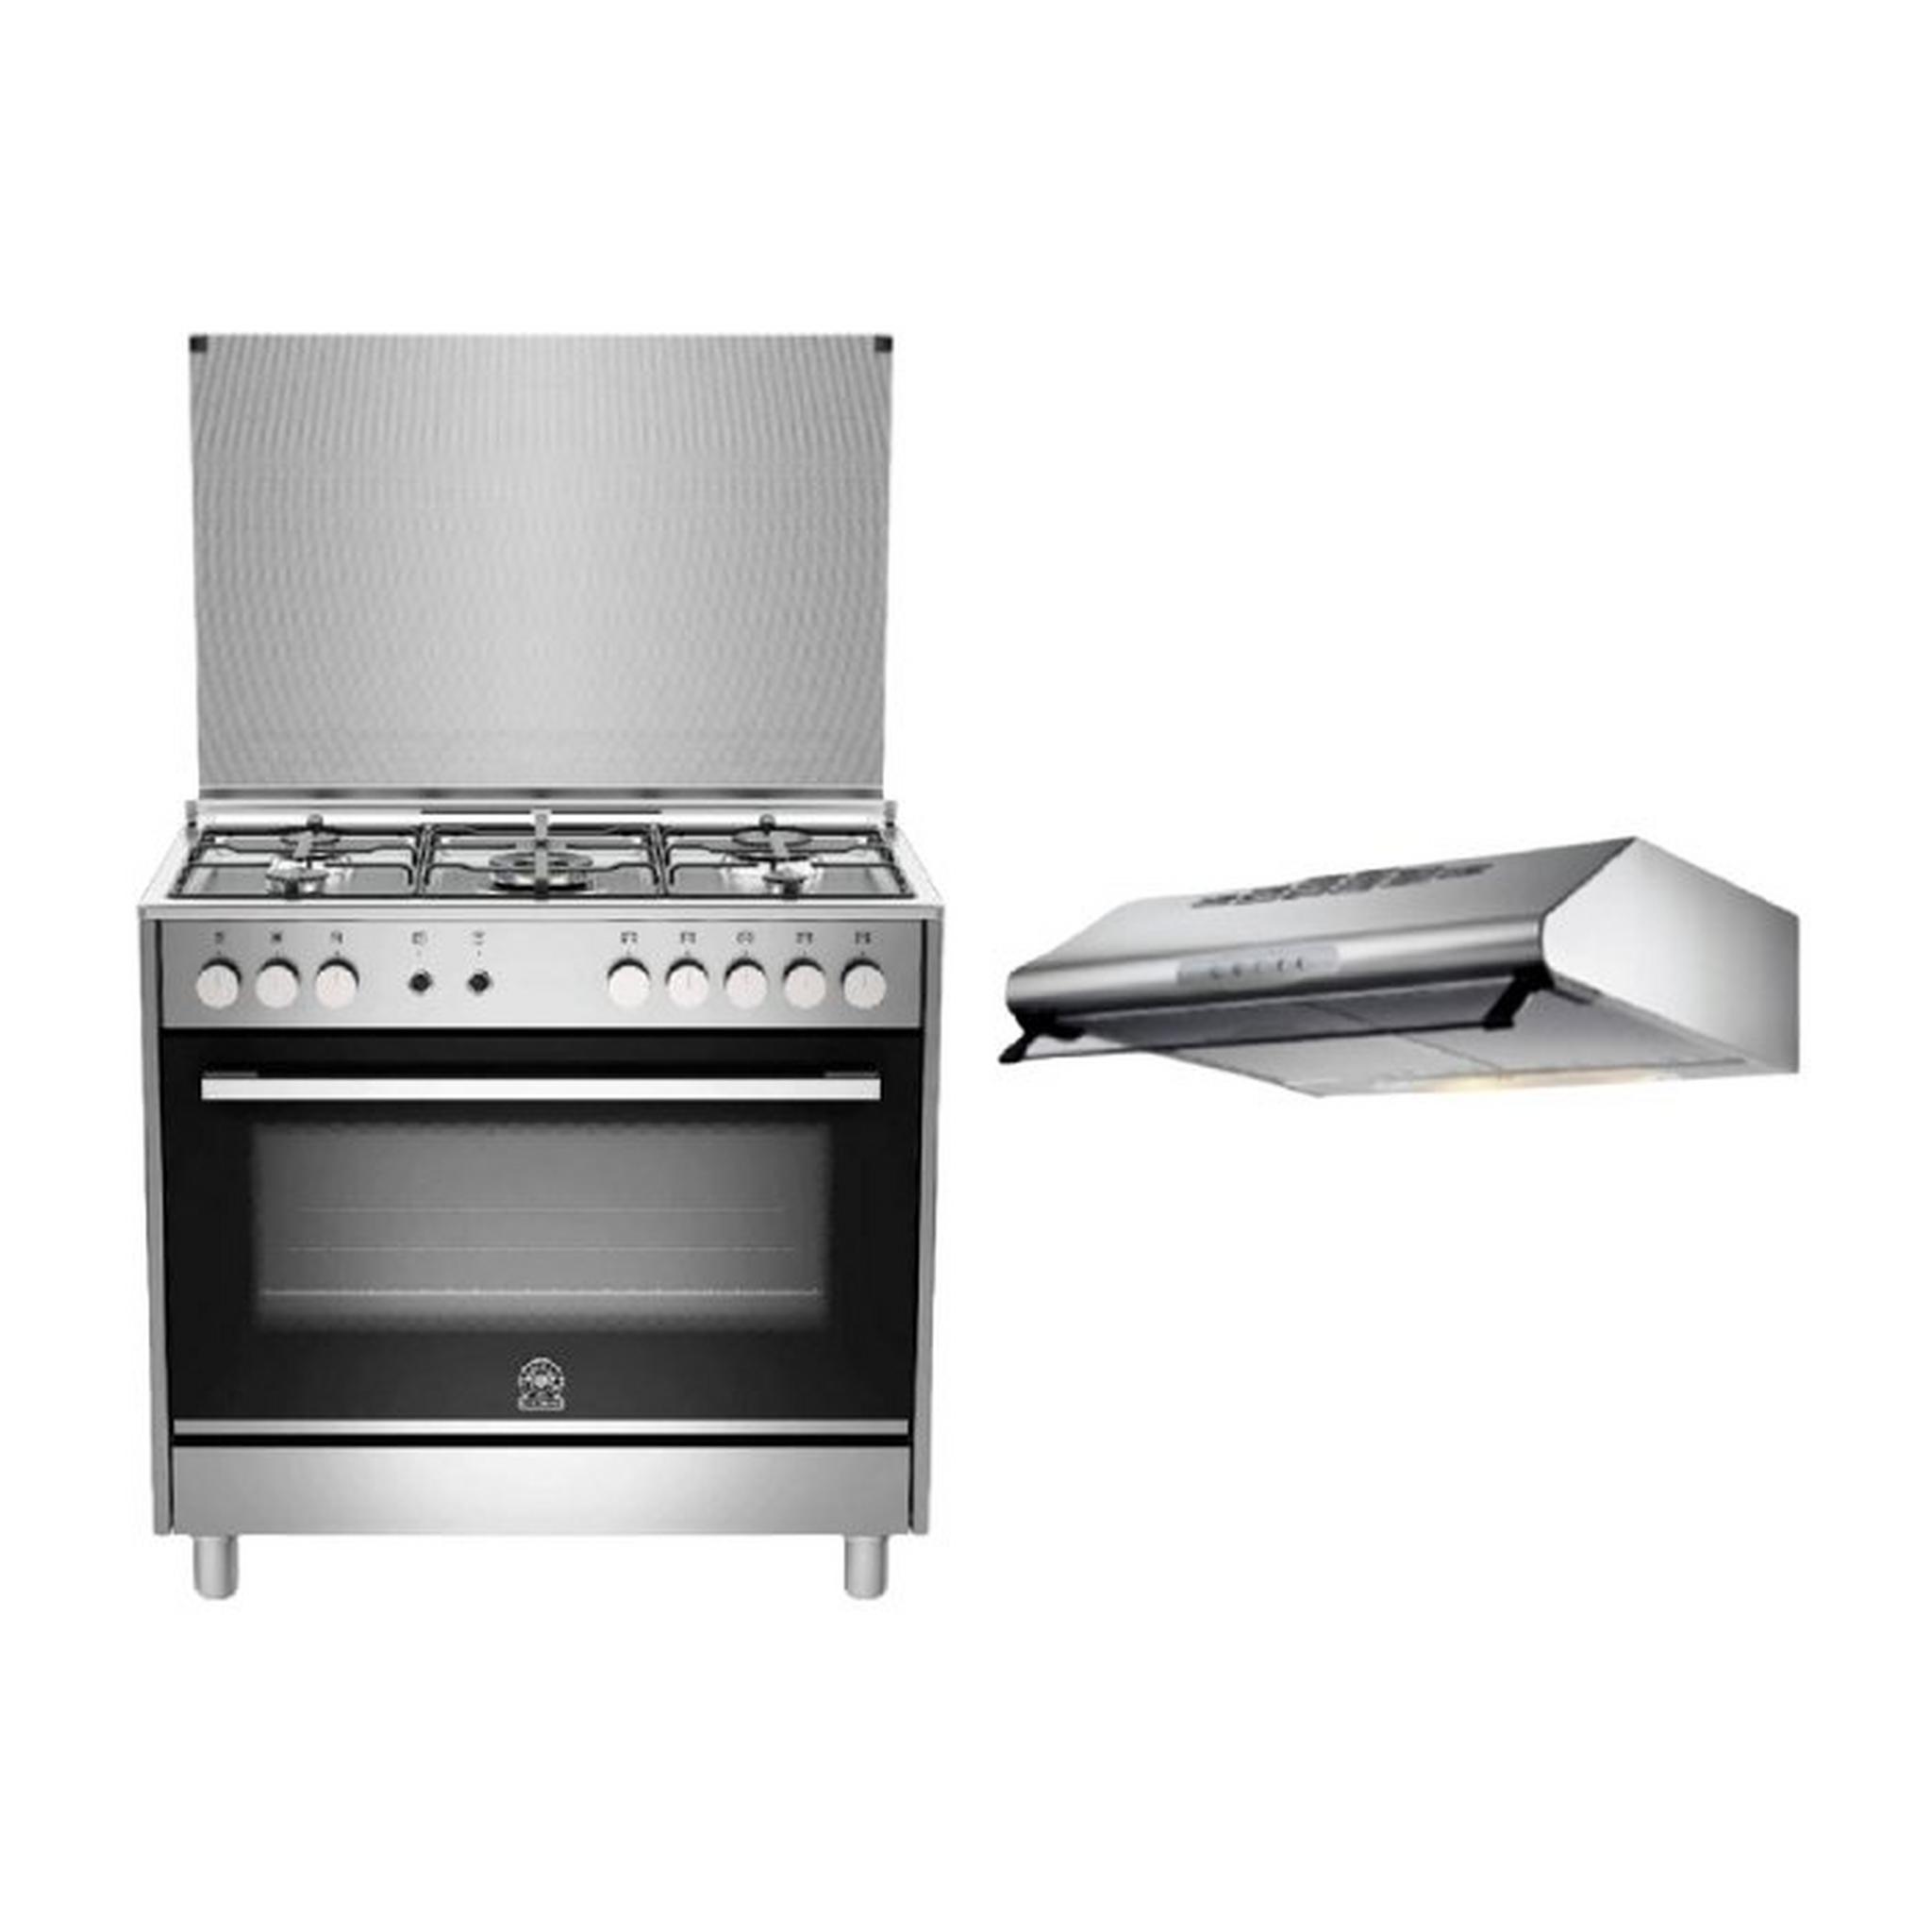 Lagermania 90x60 Gas Cooker (TUS95C31DX) – Silver + Lagermania 90cm Undercabinet Cooker Hood - Stainless Steel (K90TUSX/19)